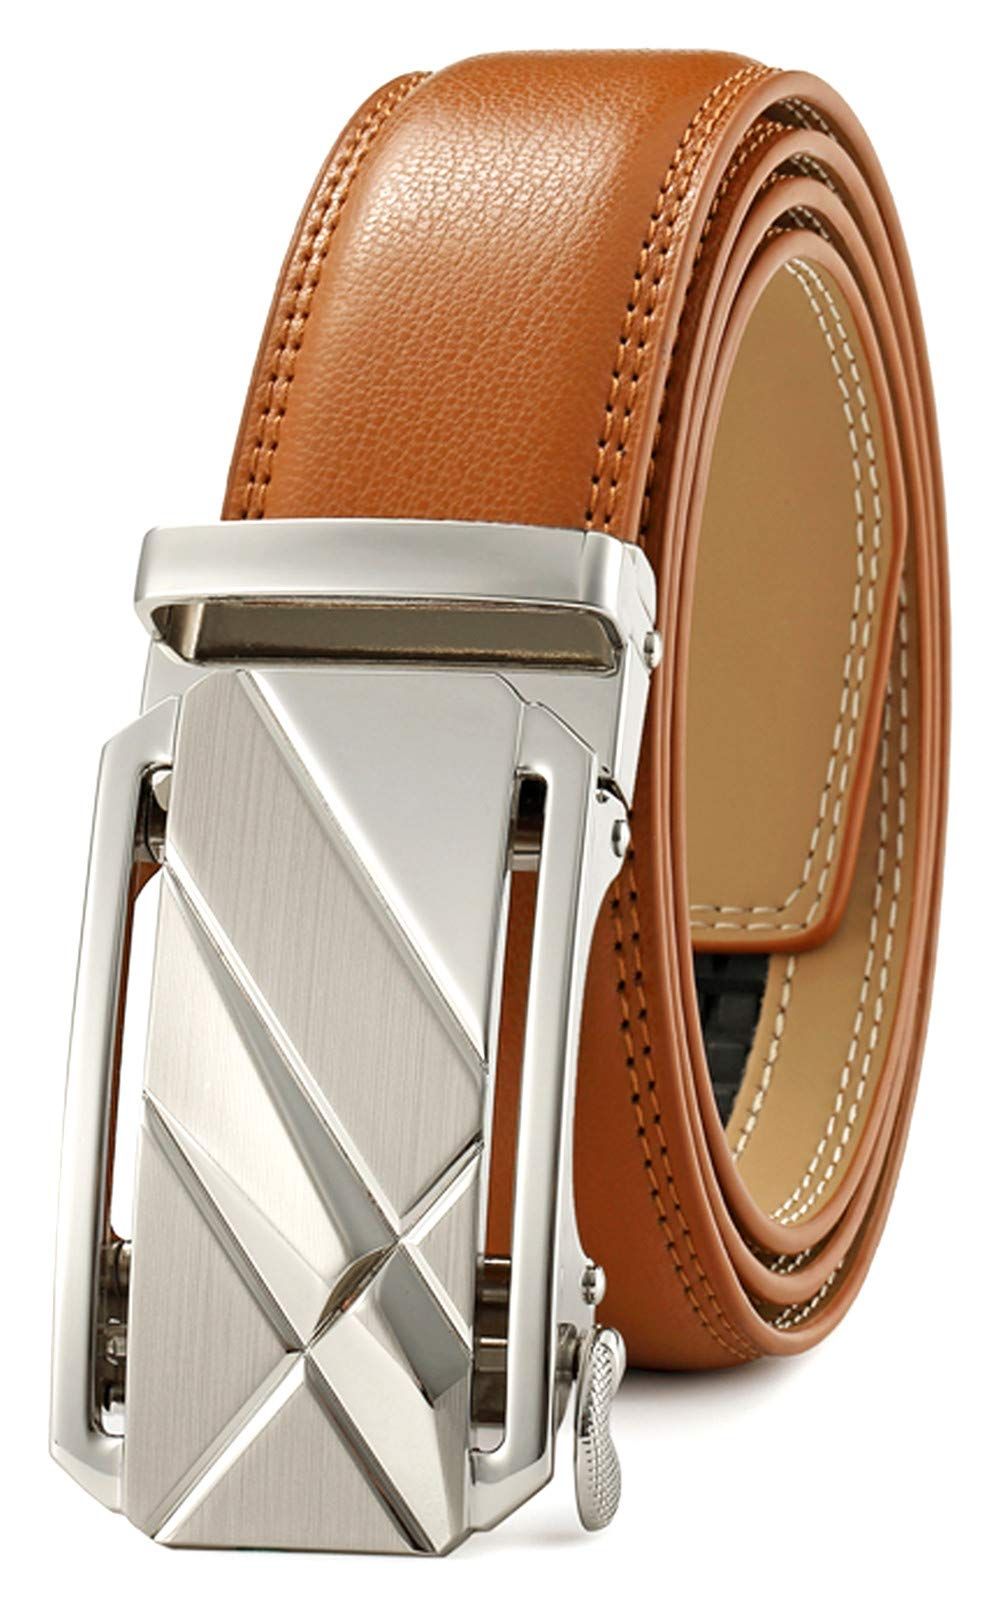 Accessorize in Style: Must-Have Men’s Belts for Every Occasion